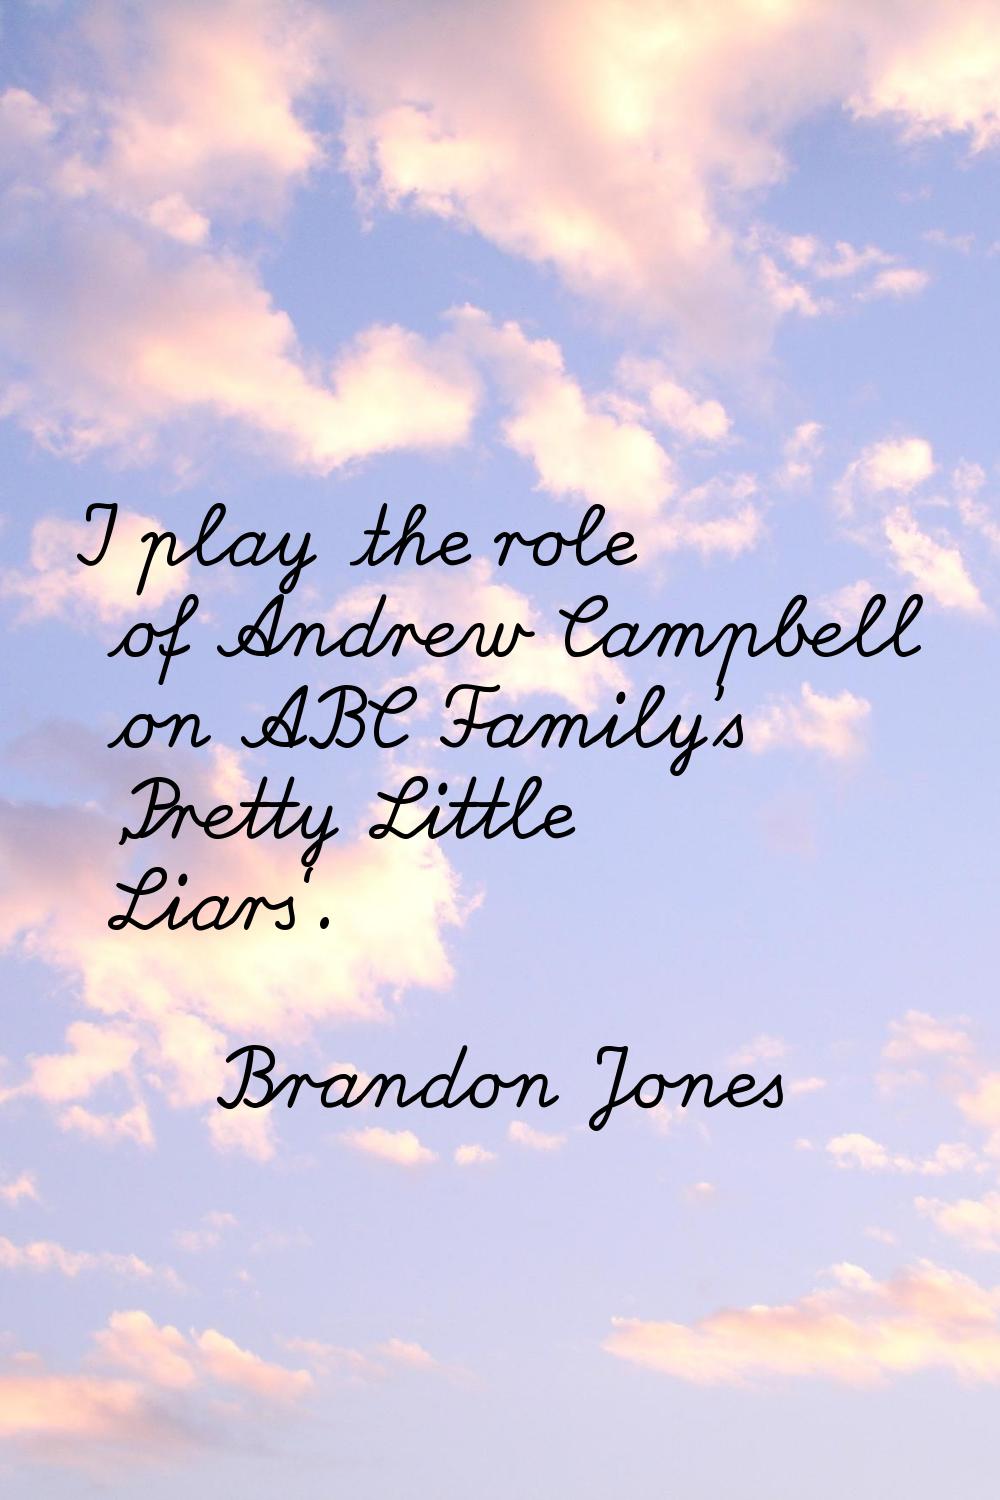 I play the role of Andrew Campbell on ABC Family's 'Pretty Little Liars'.